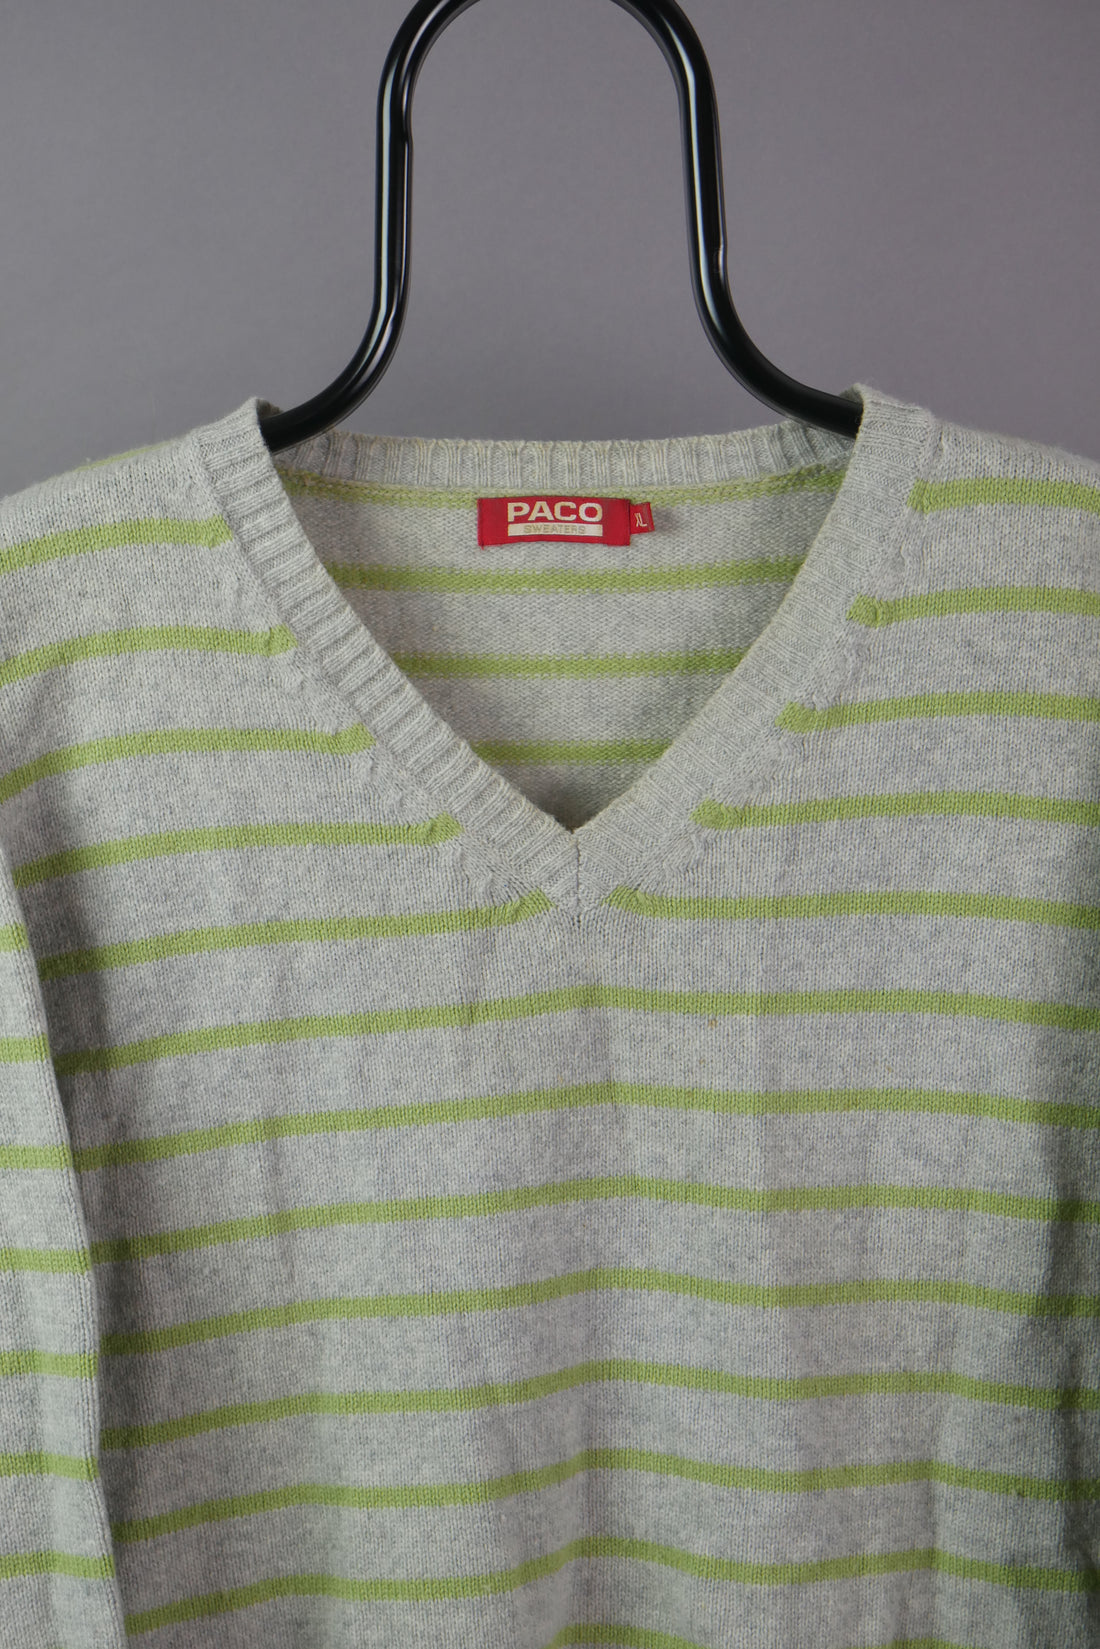 The Paco V Neck Sweater (Women's XL)